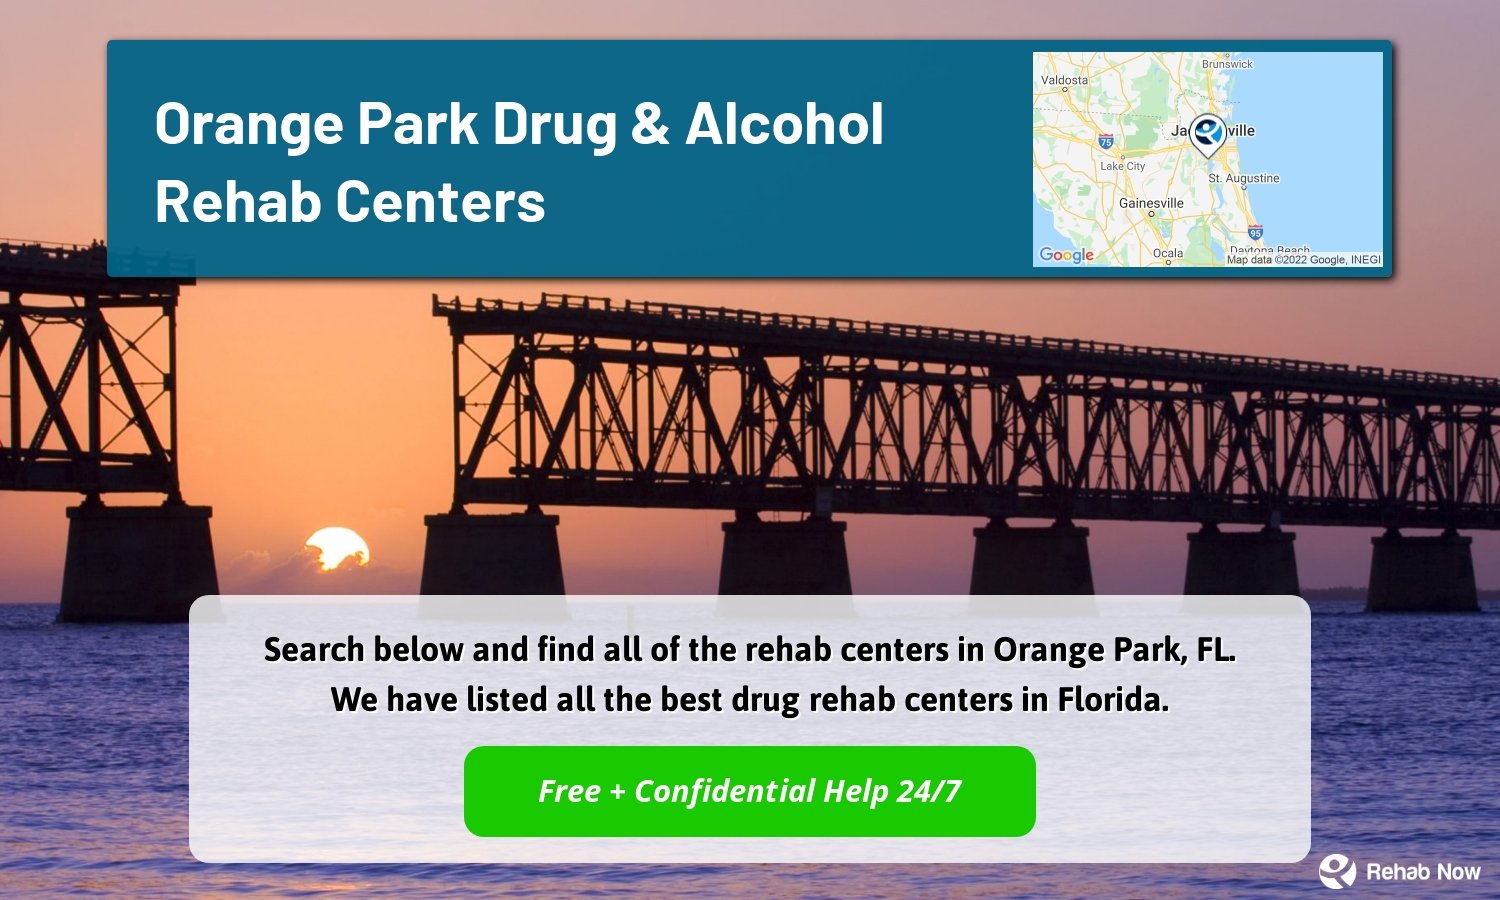 Search below and find all of the rehab centers in Orange Park, FL. We have listed all the best drug rehab centers in Florida.